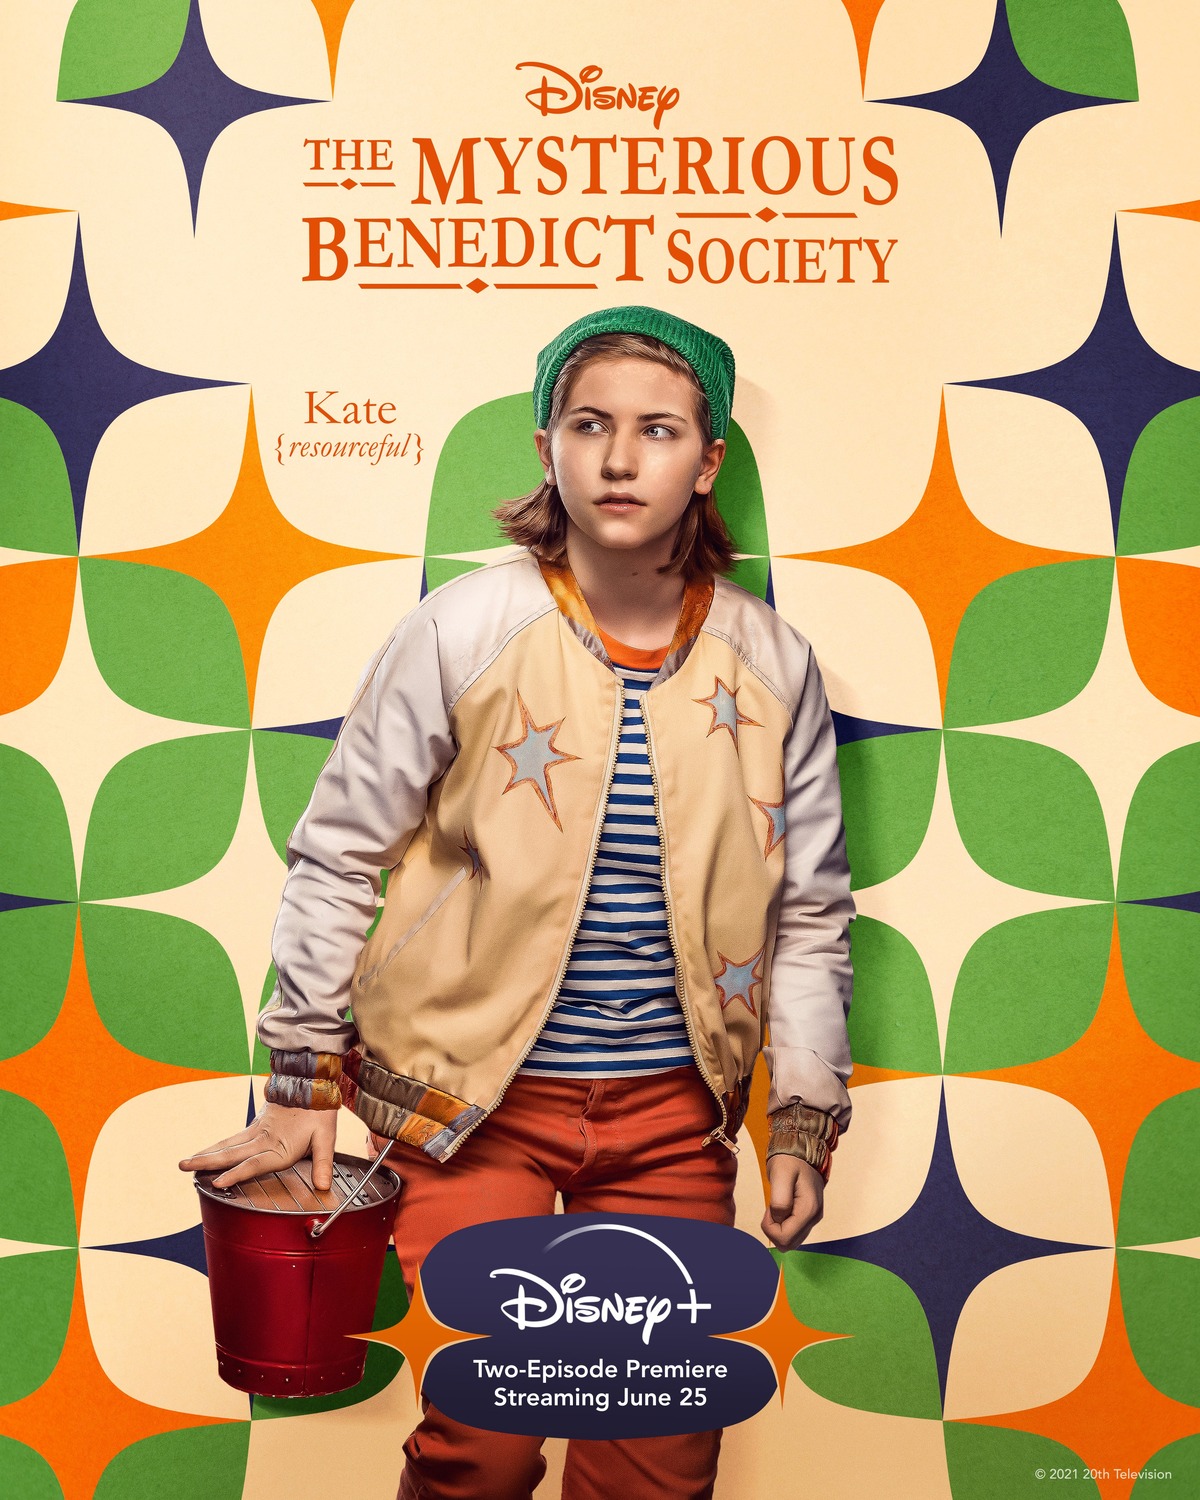 Extra Large TV Poster Image for The Mysterious Benedict Society (#3 of 11)